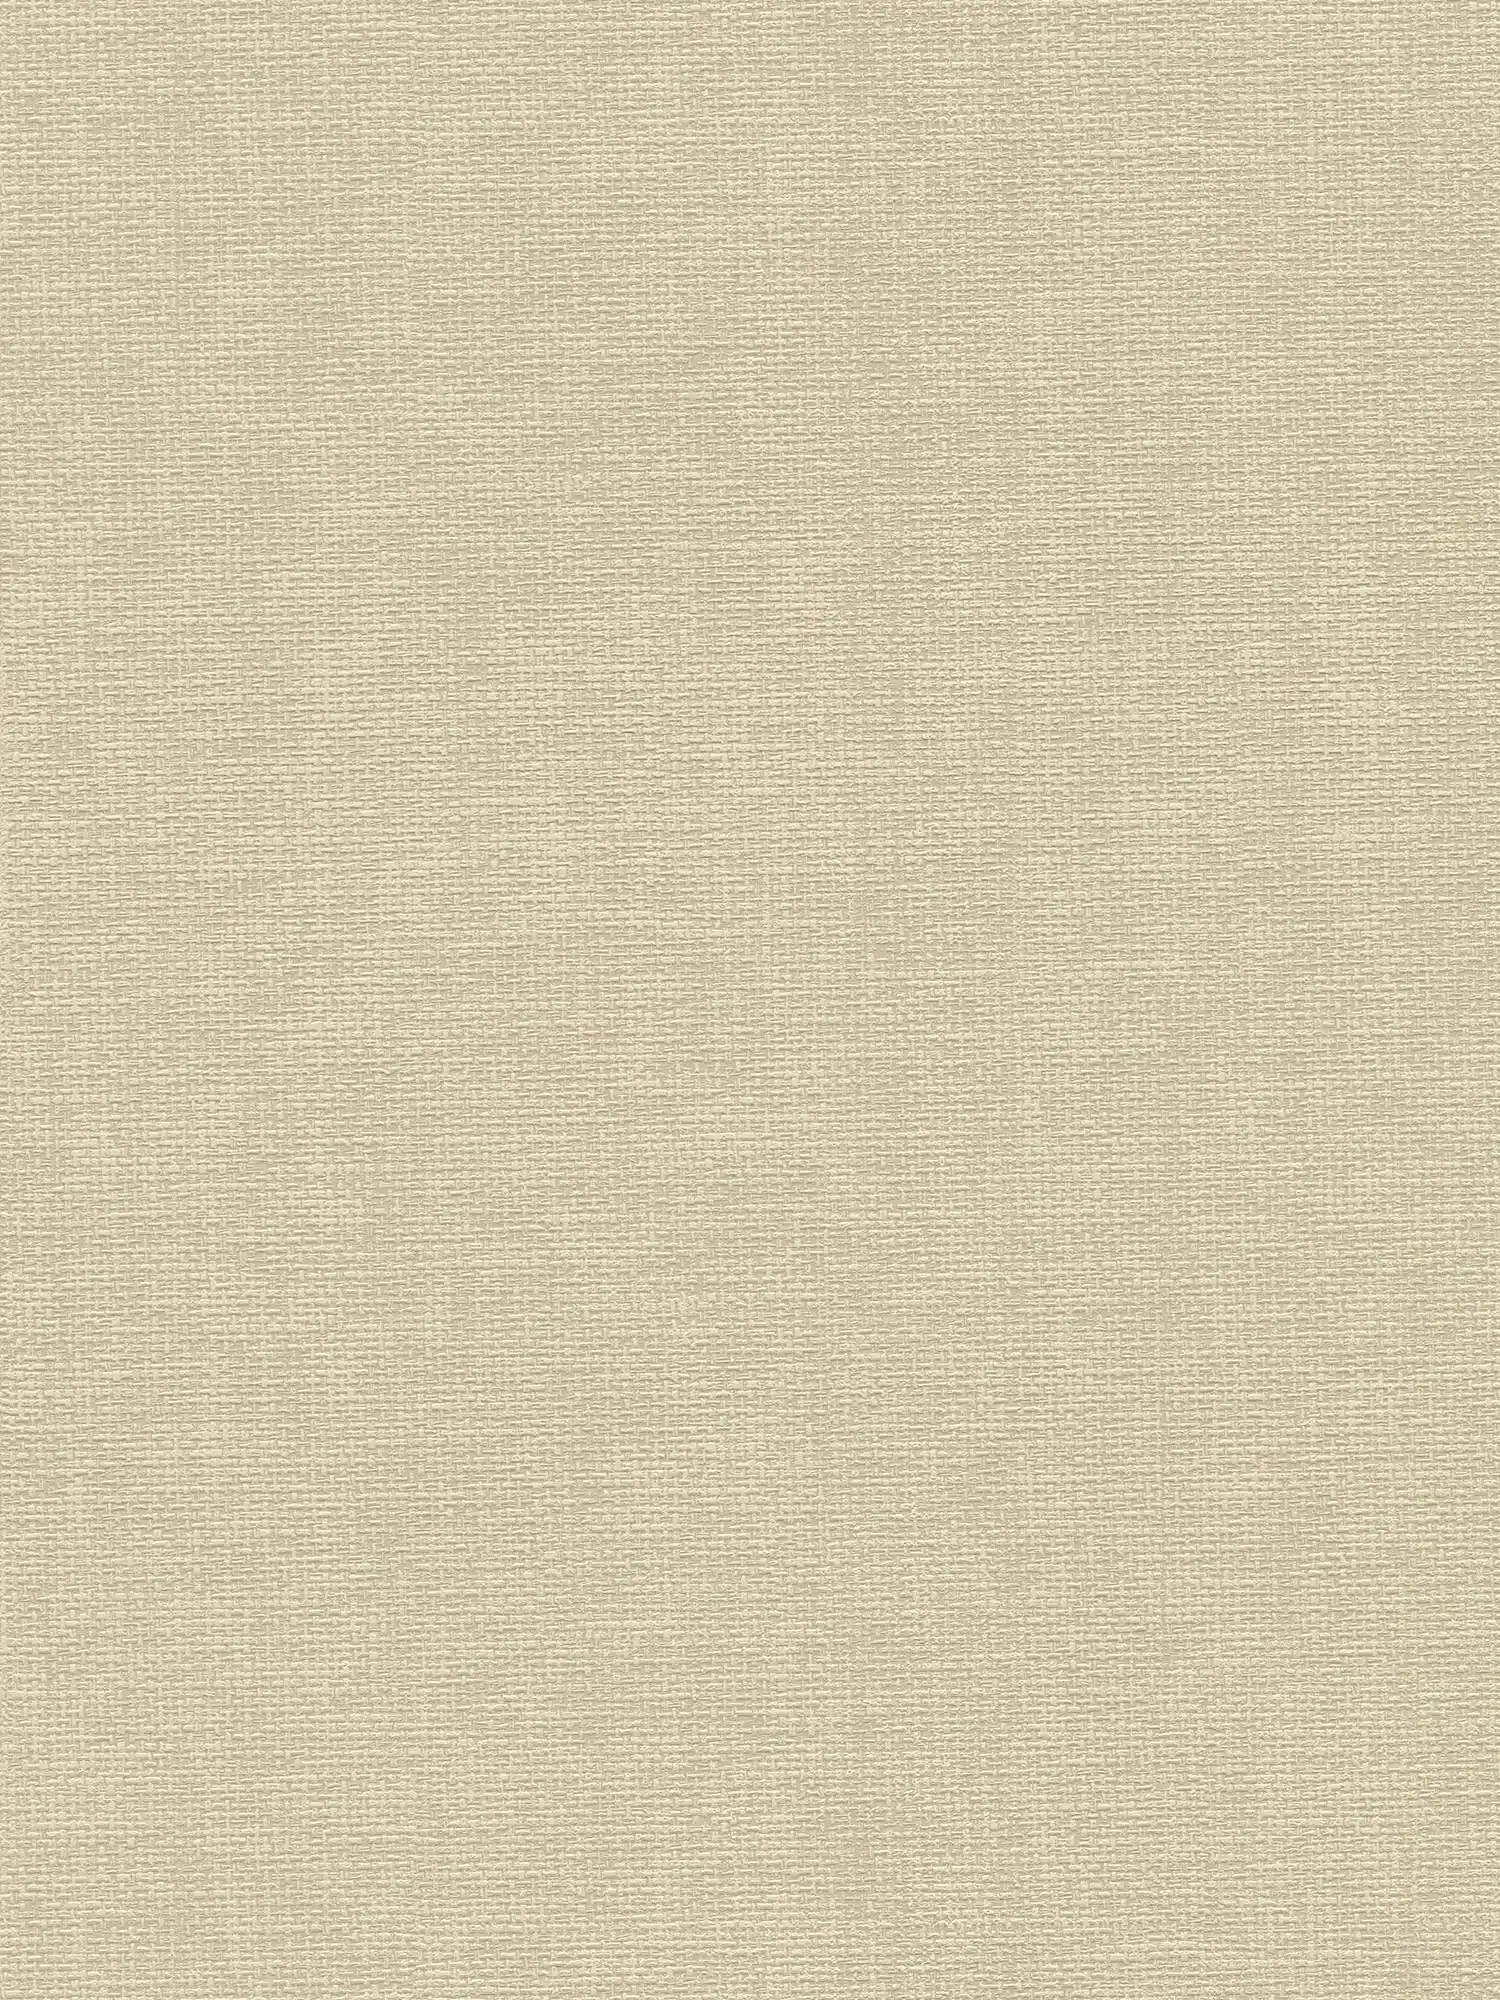 Textile design wallpaper with fabric structure - beige, grey
